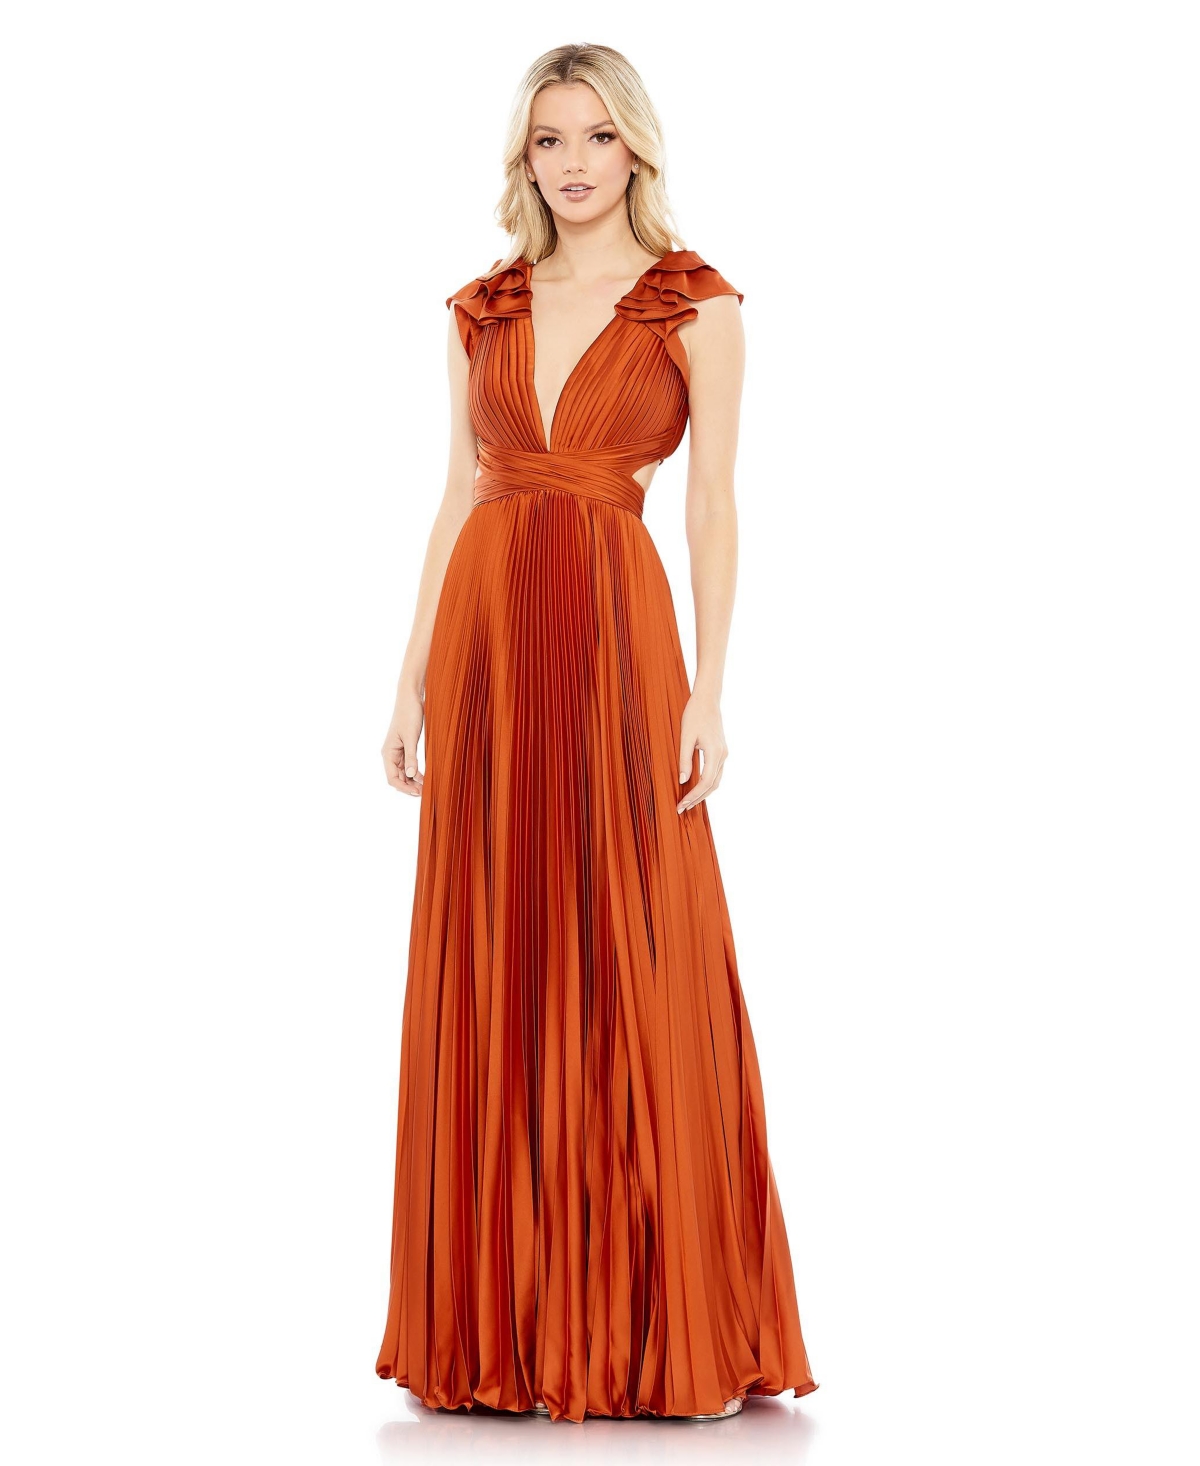 Women's Ieena Pleated Ruffled Cap Sleeve Cut Out Lace Up Gown - Burnt orange